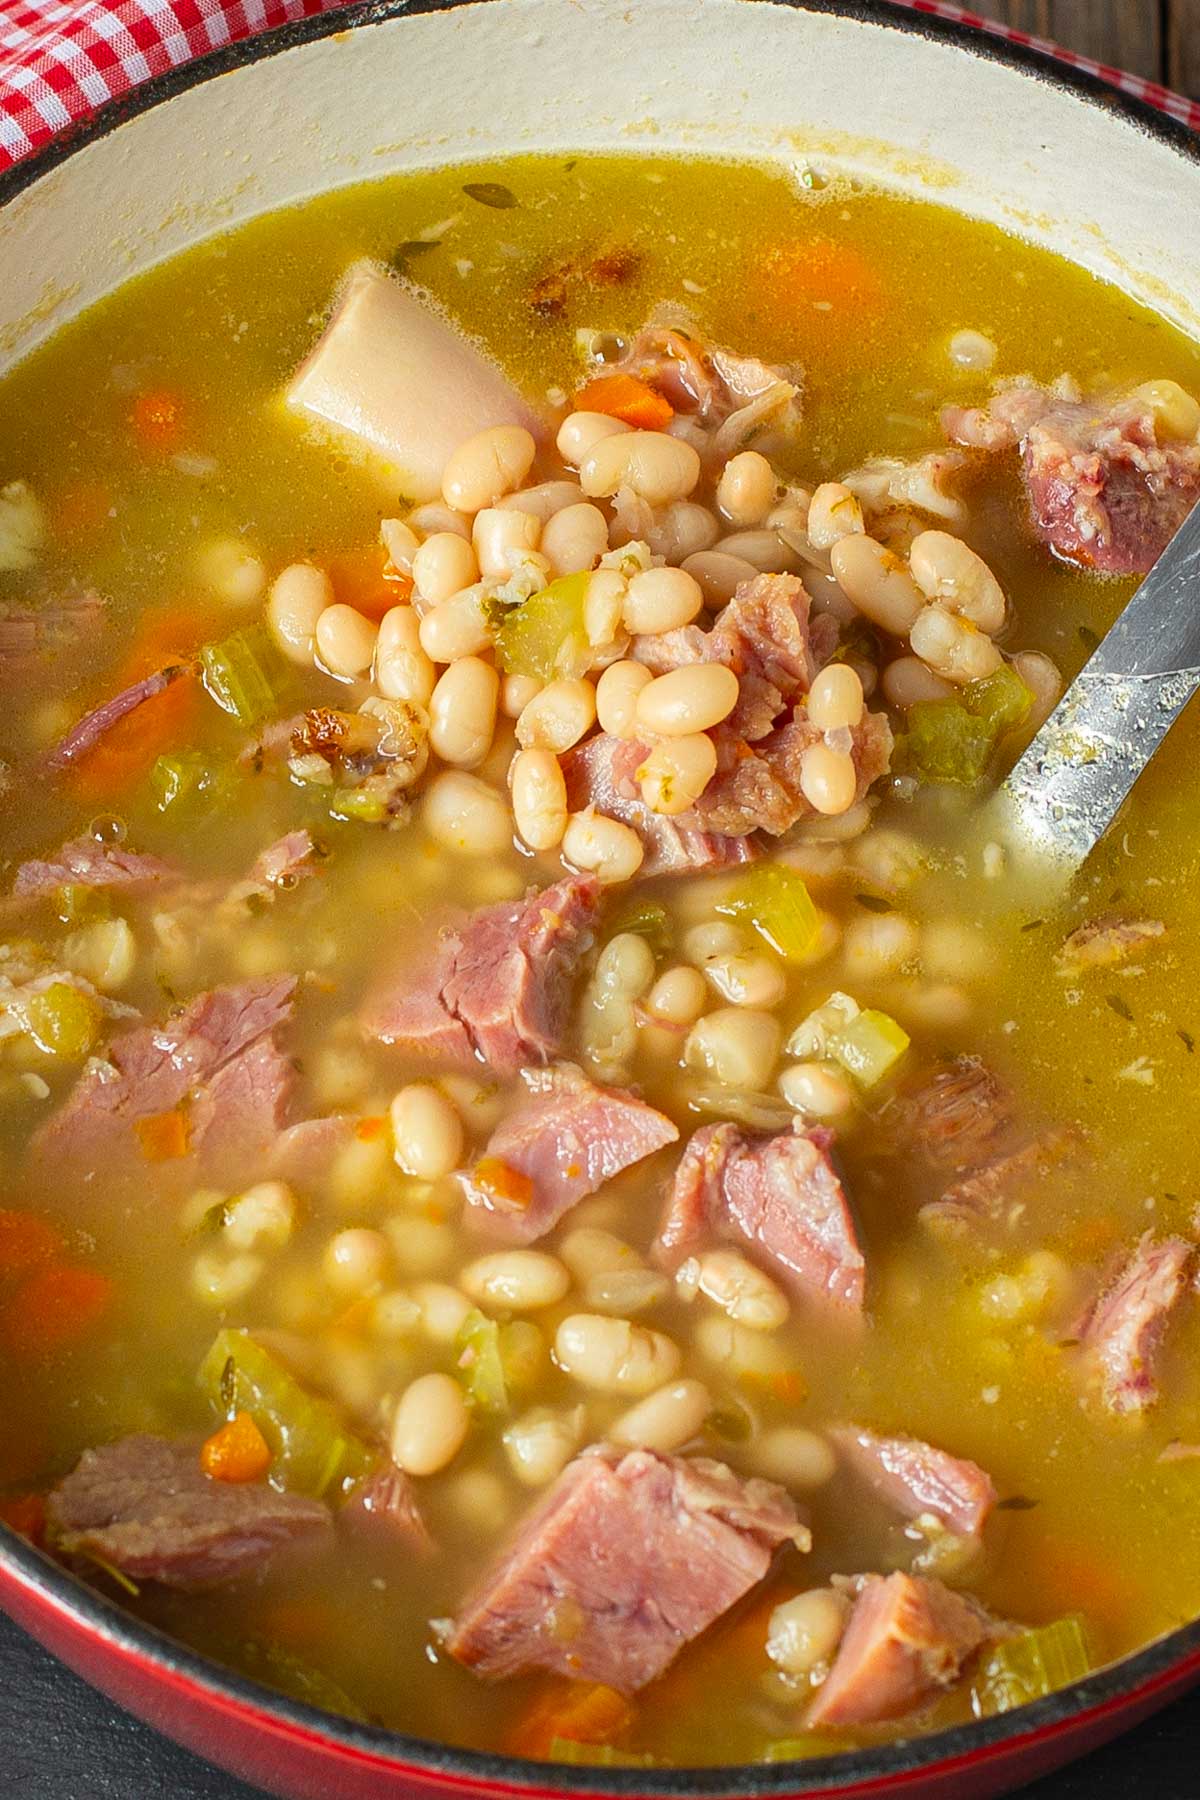 Cooking pot of soup with chunks of ham, a ham hock, beans and vegetables.